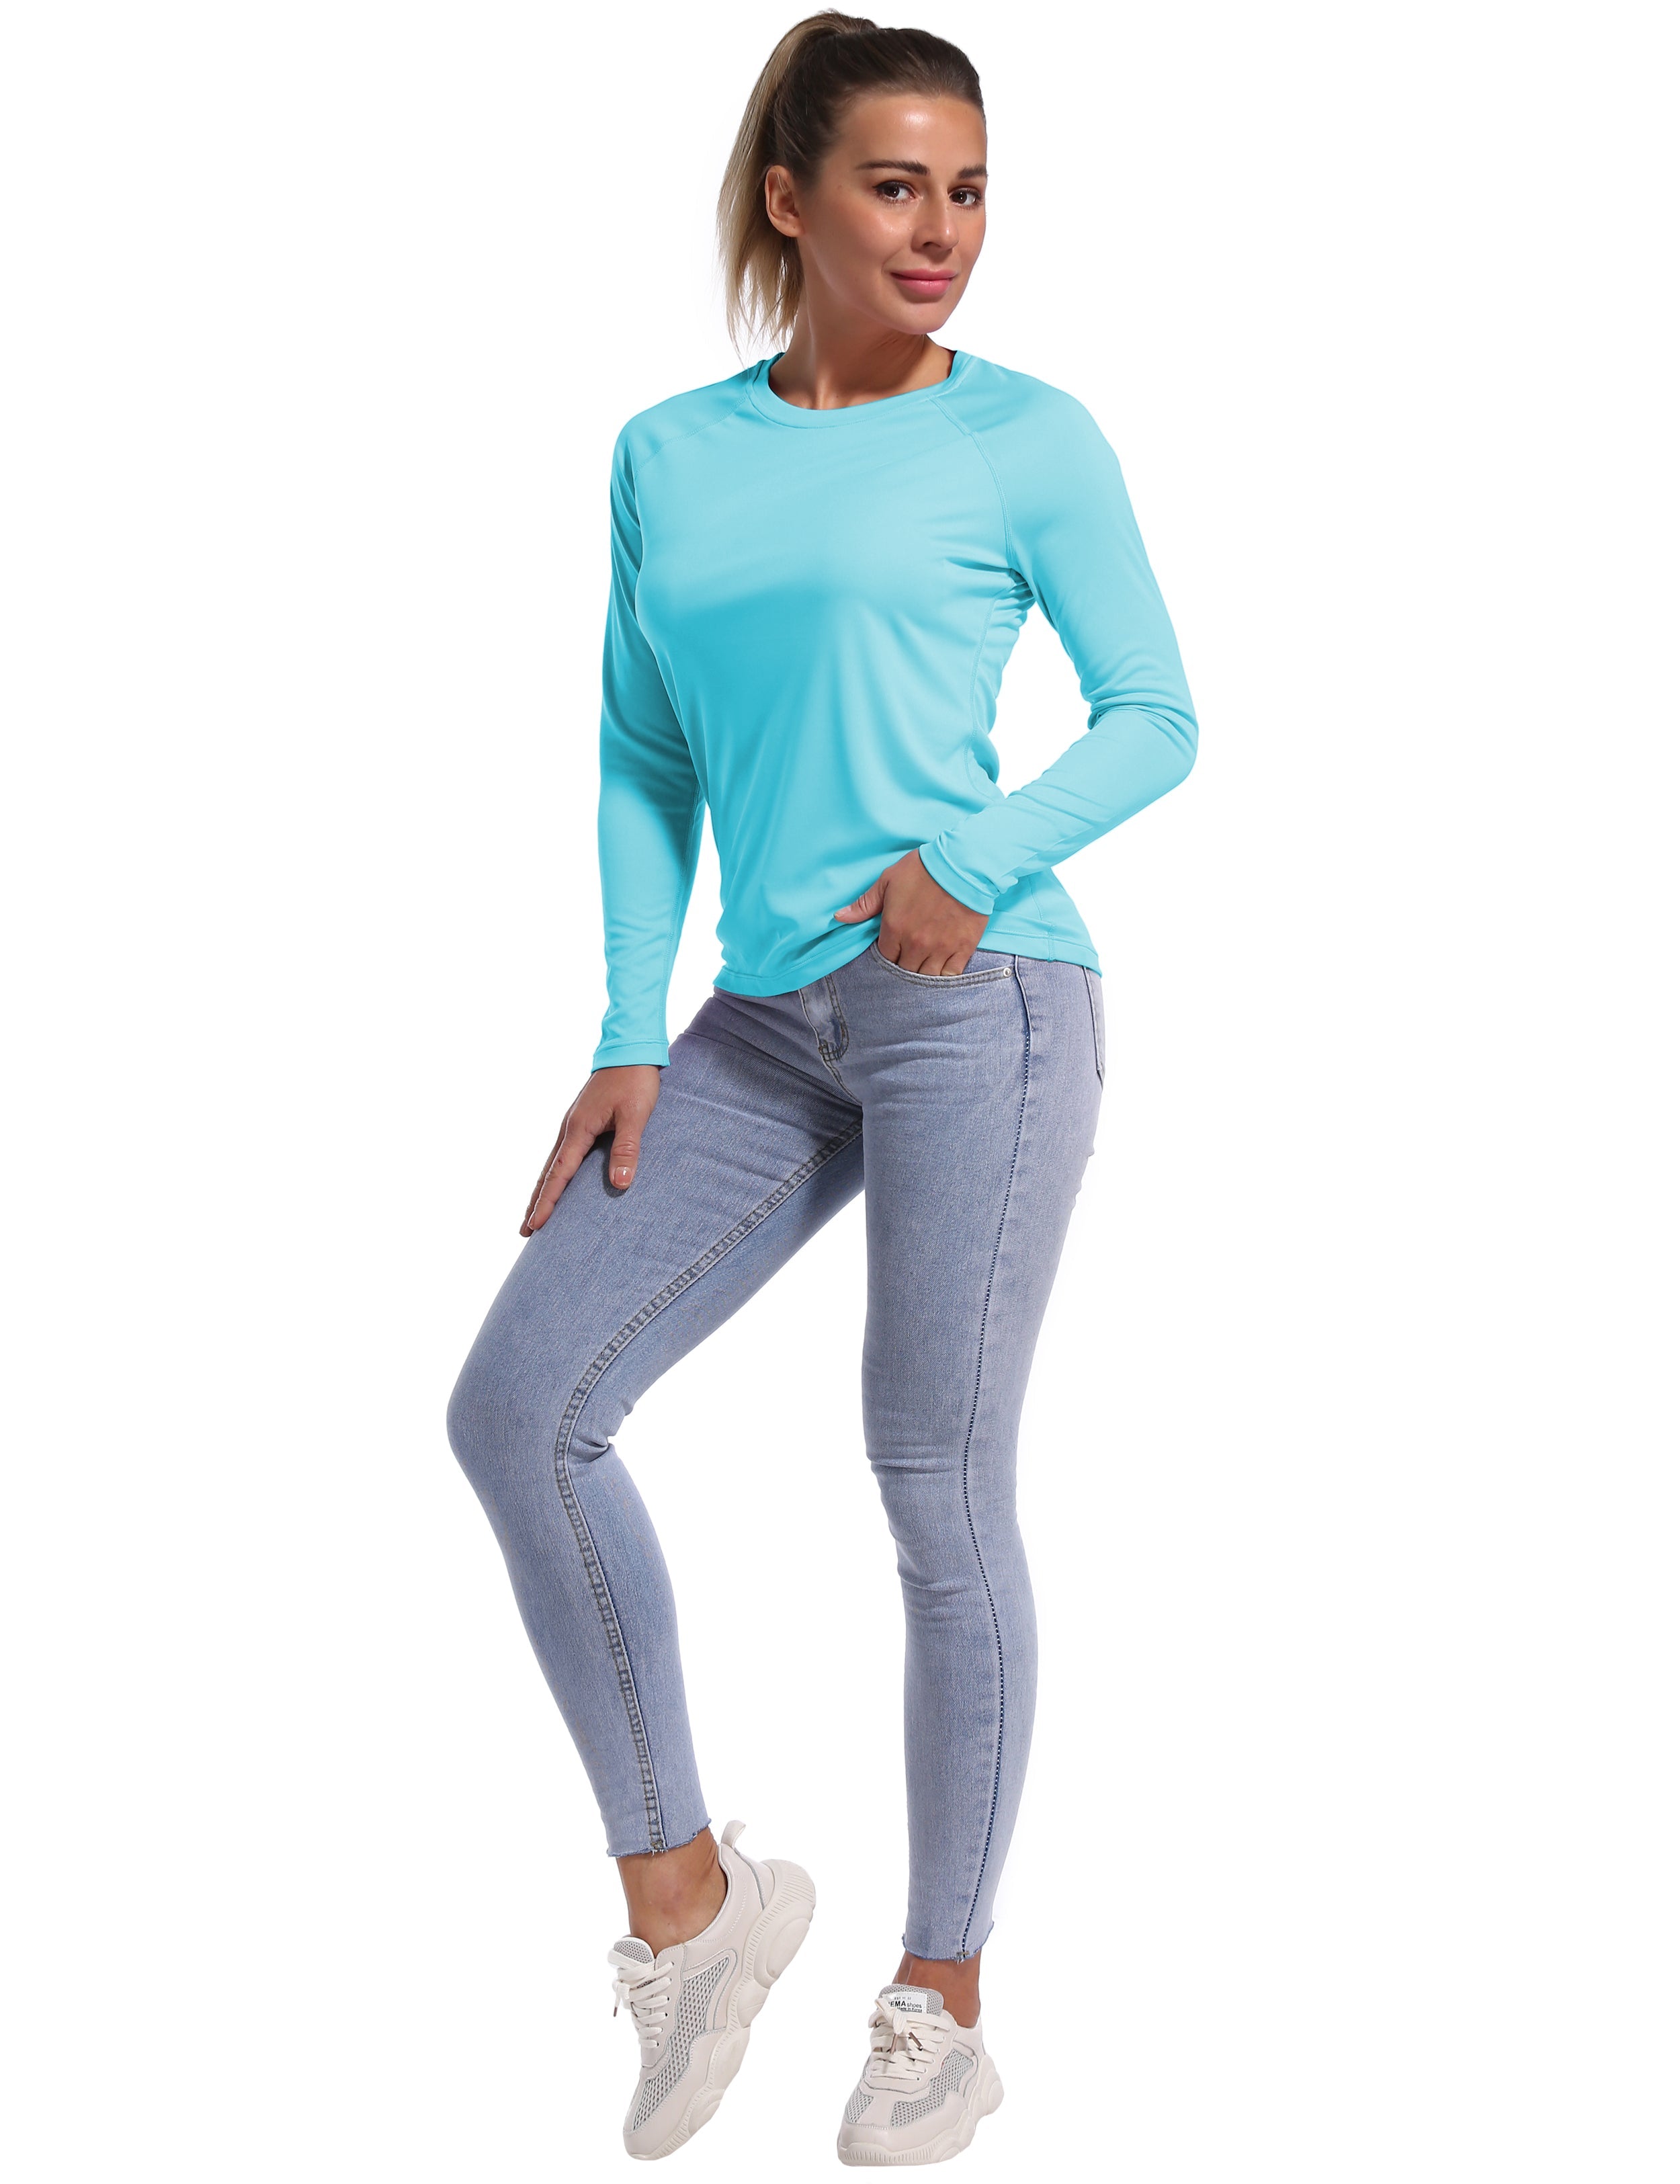 Long Sleeve Athletic Shirts blue 100% polyester Lightweight Slim Fit UPF 50+ blocks sun's harmful rays Treated to wick moisture, dries ultra-fast